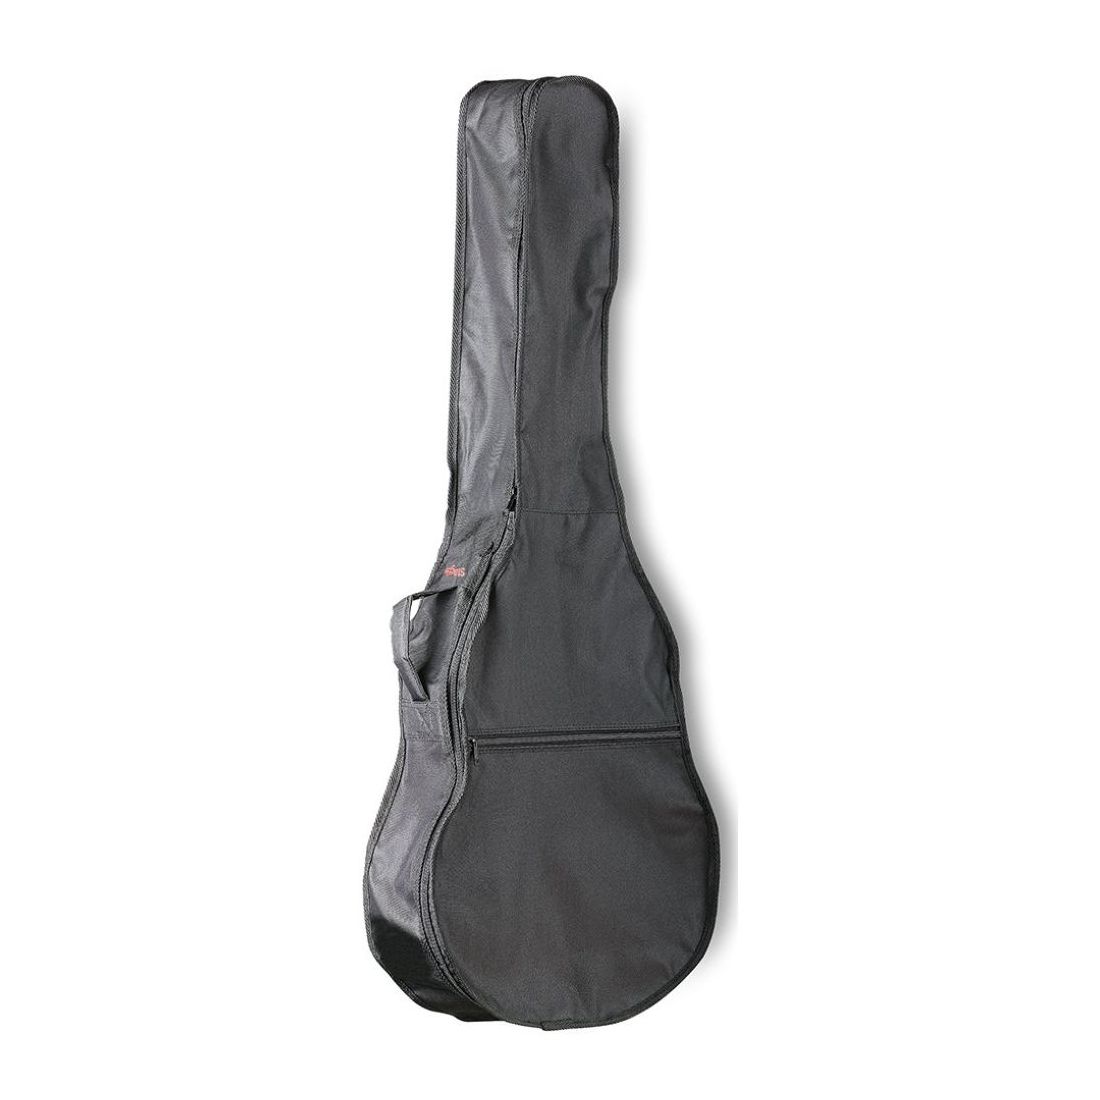 Stagg STB 1 C Classical Guitar Gig Bag